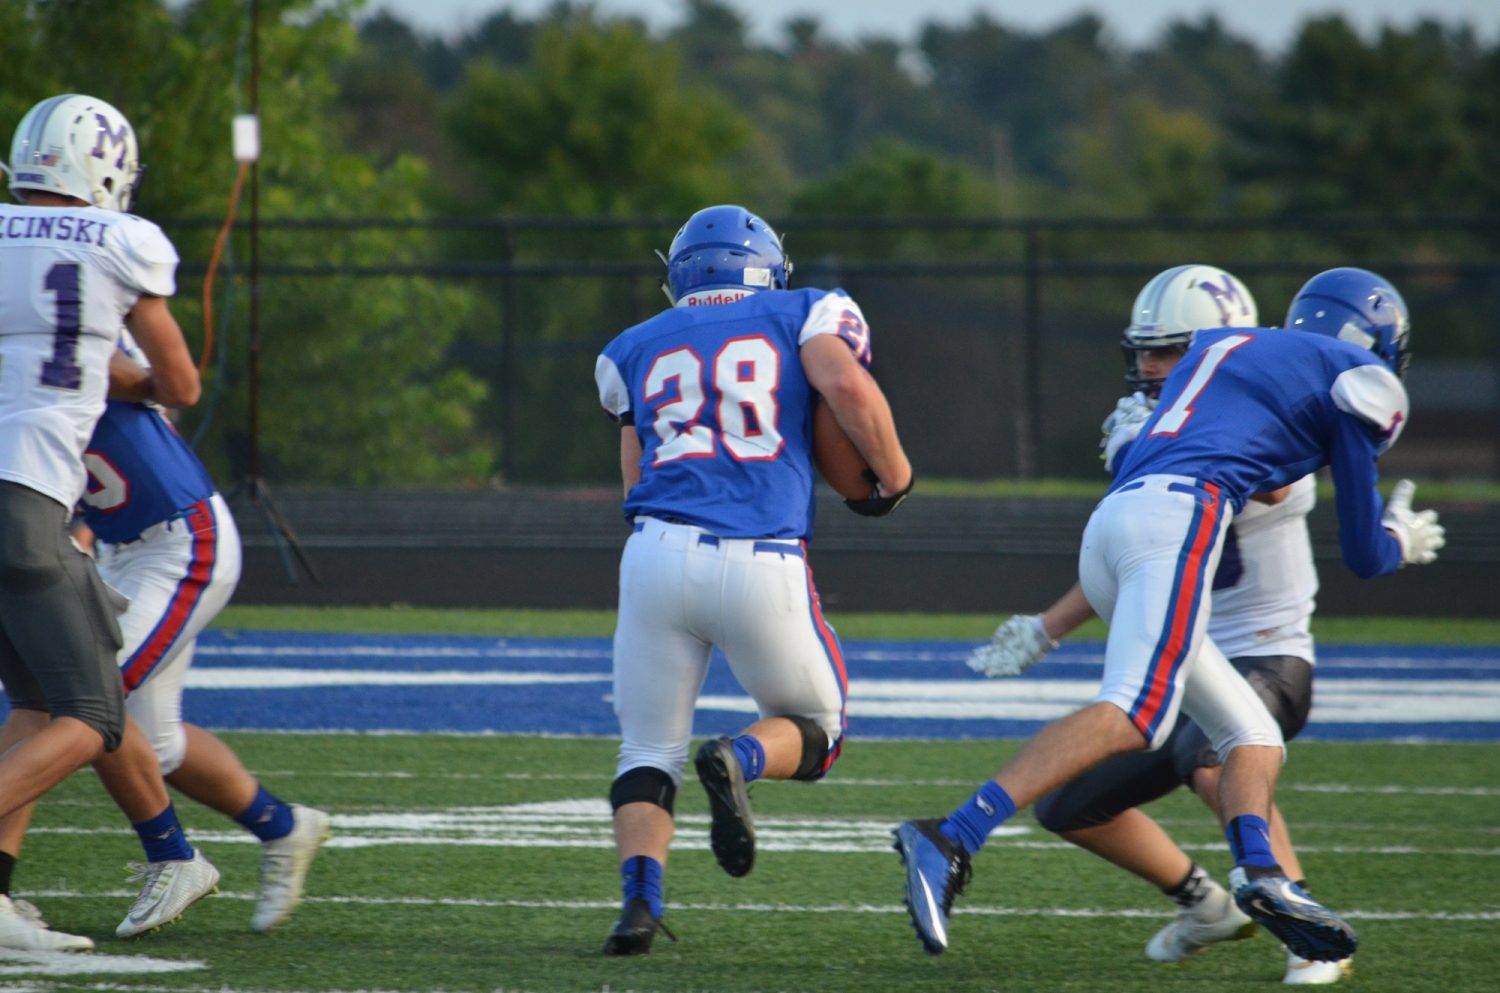 Merrill football shines in conference opener